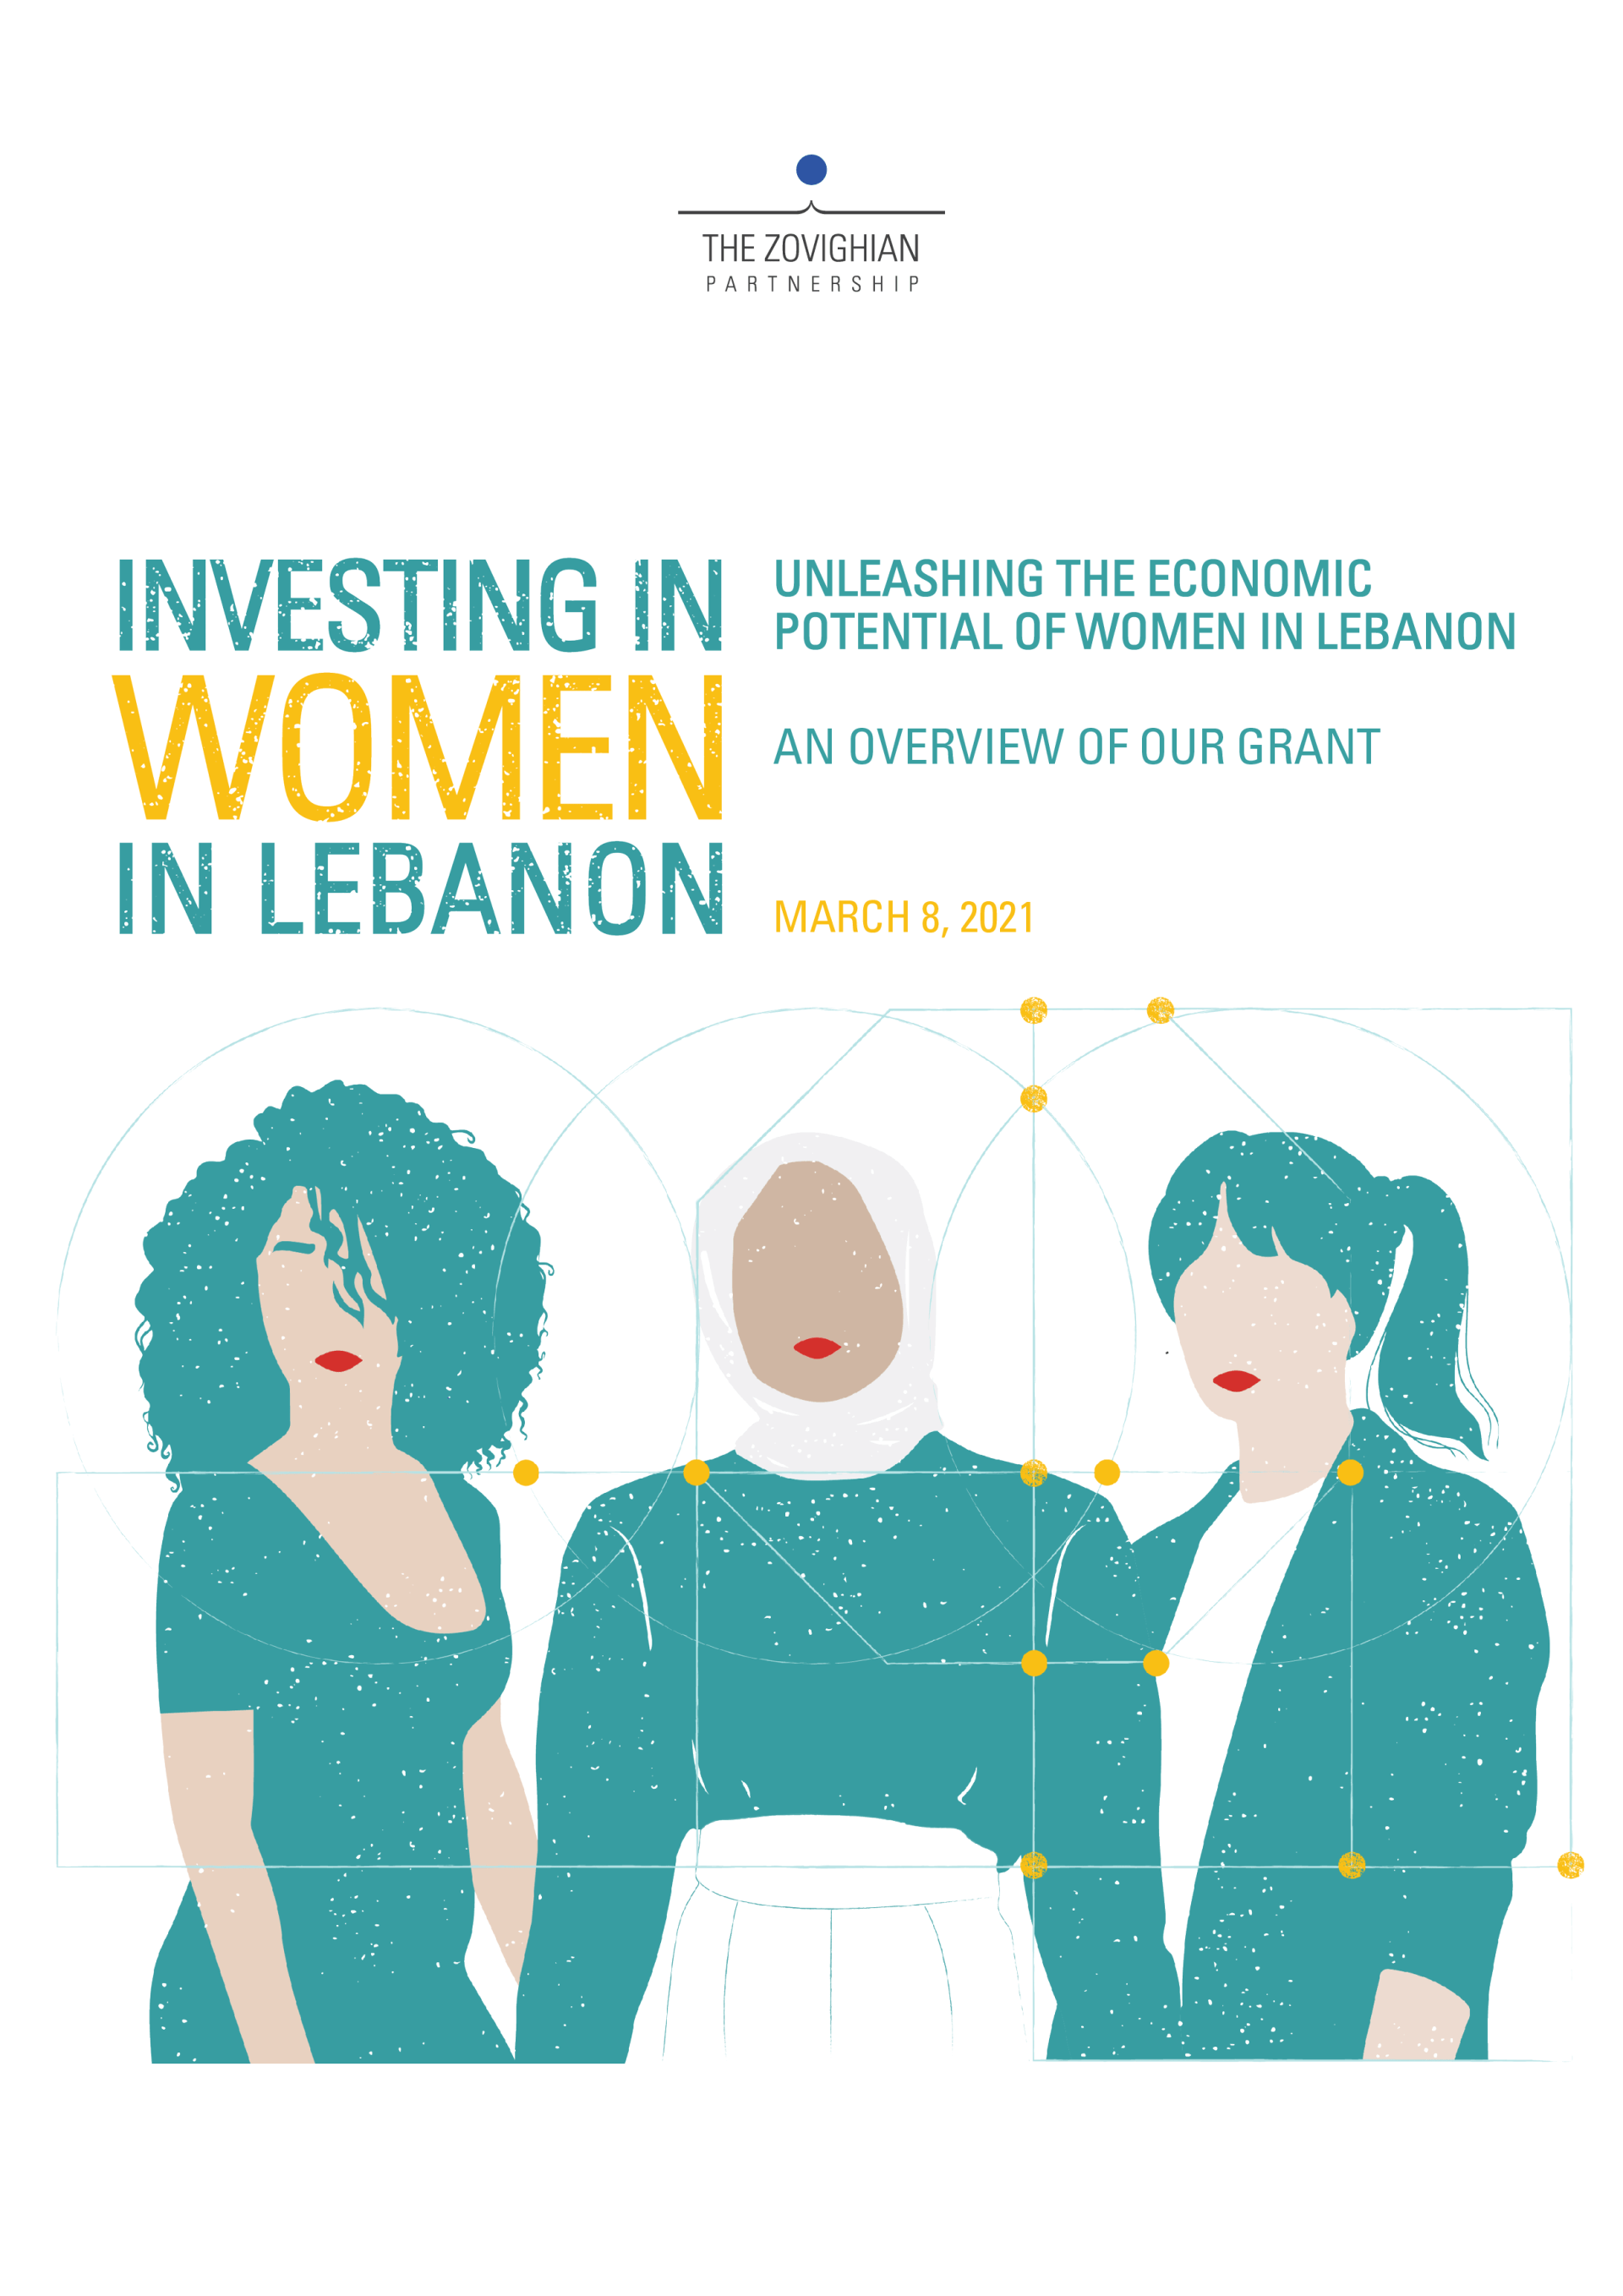 Dedicated grant to invest in the economic empowerment of women in Lebanon